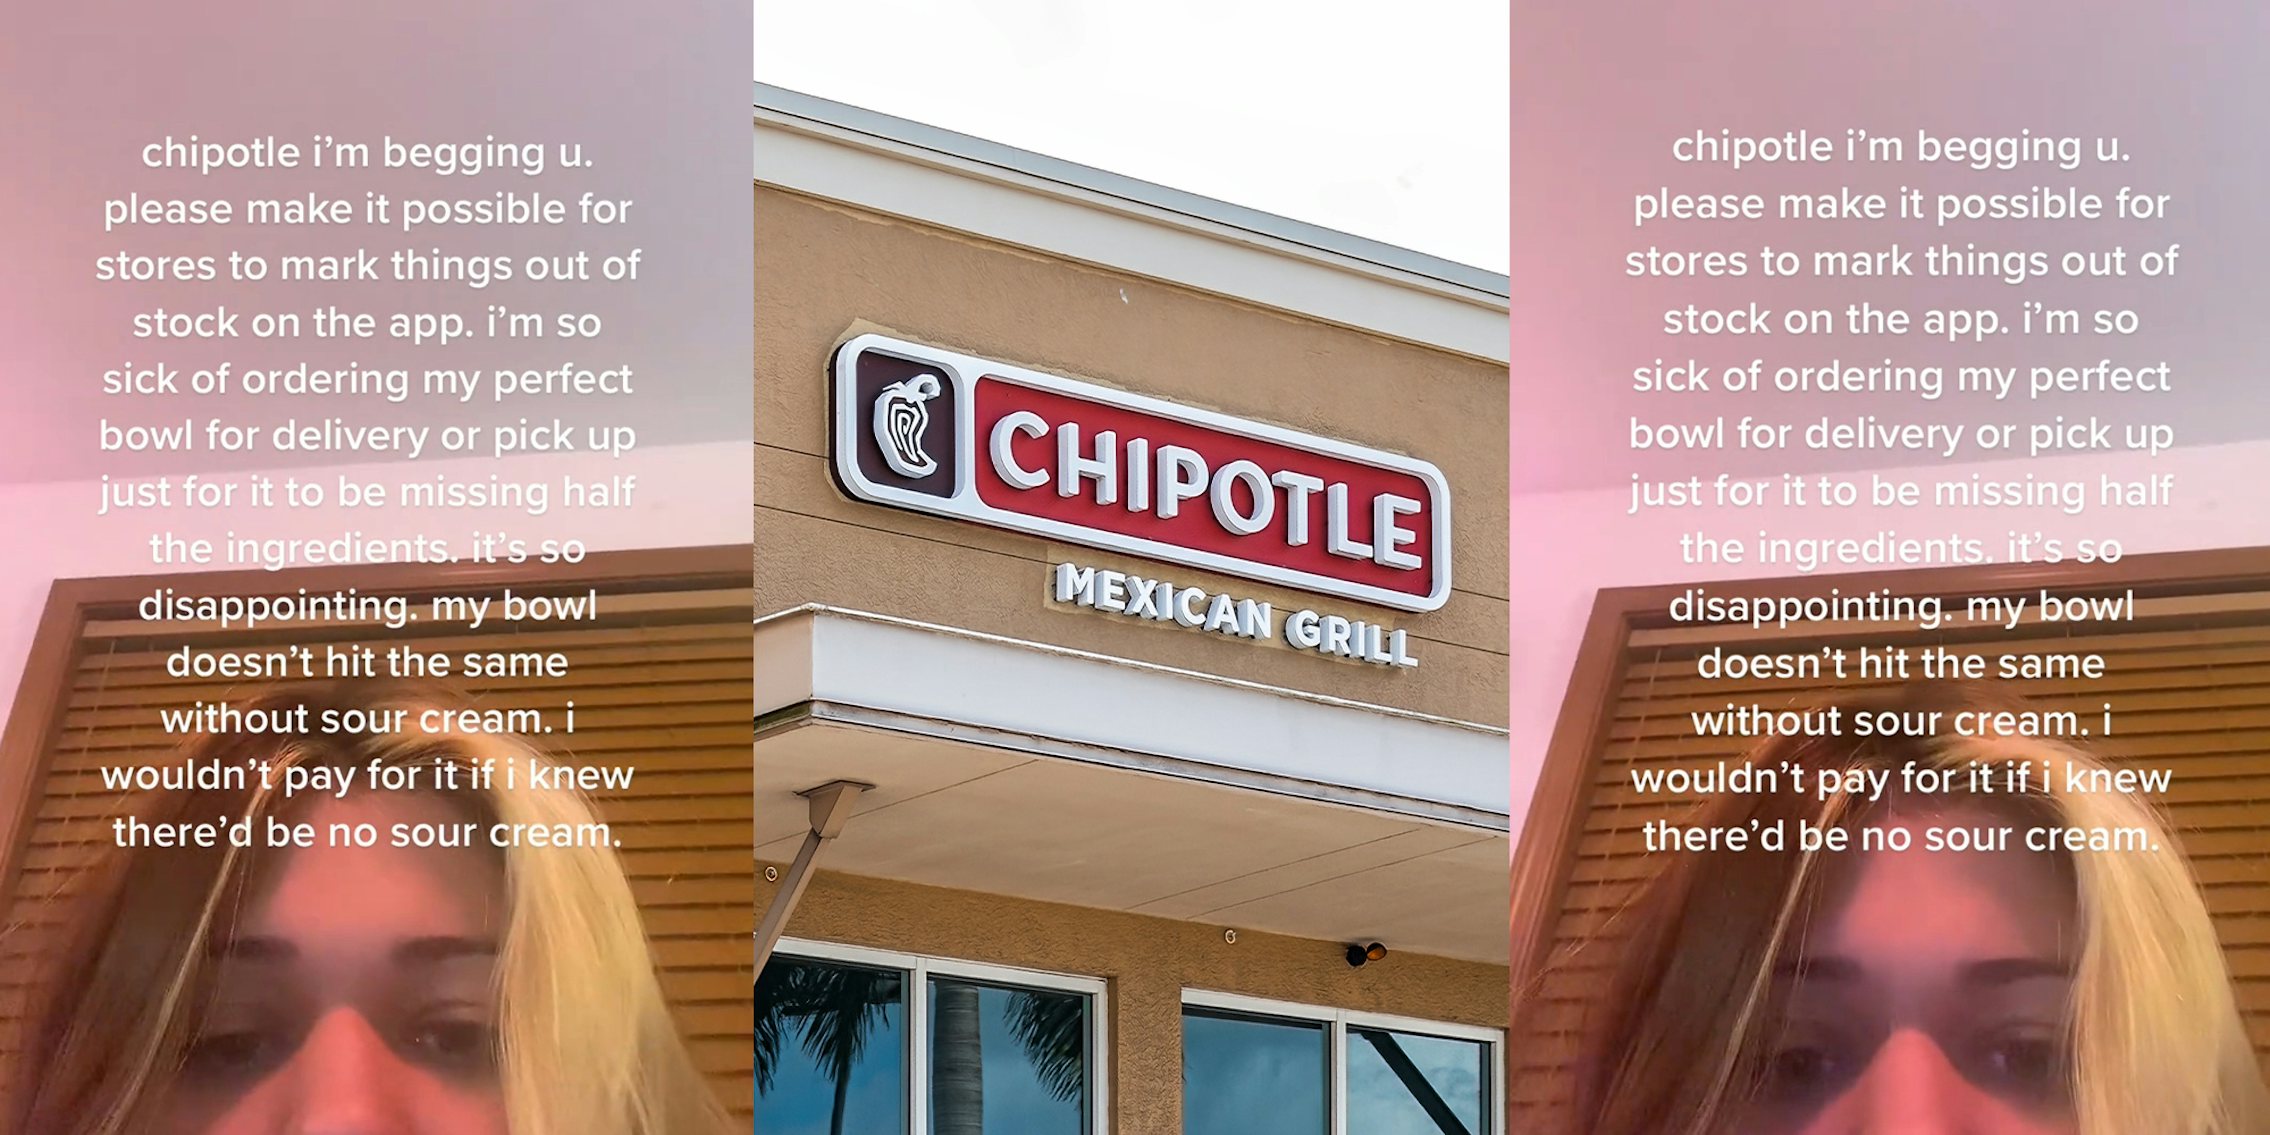 Customer Calls Out Chipotle For Not Marking Missing Ingredients